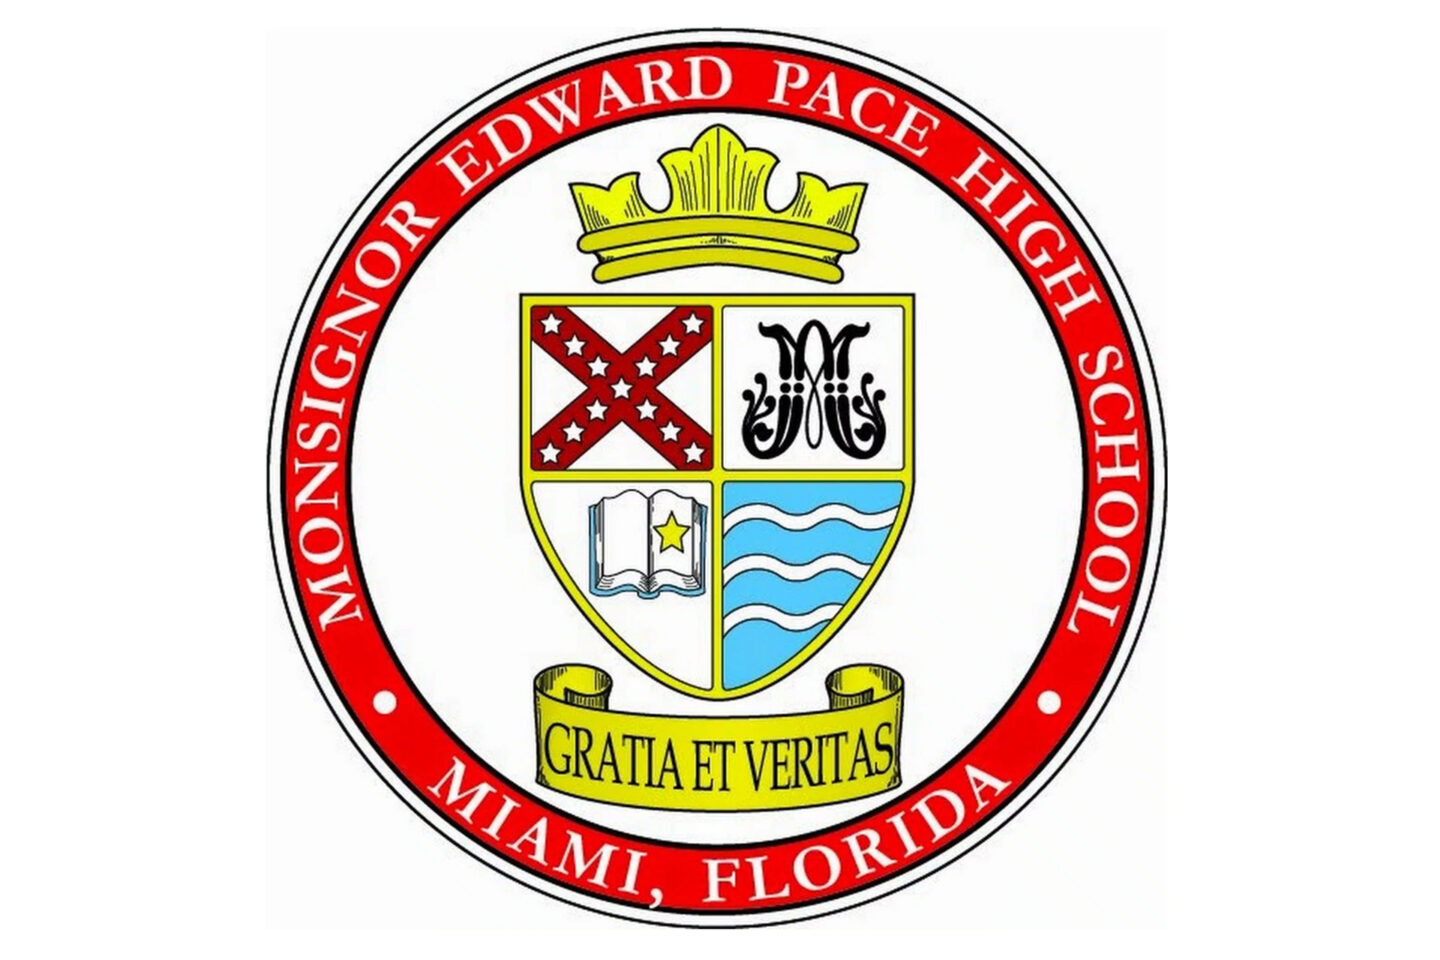 Monsignor Edward Pace High School Commencement Exercise 2022 Miami